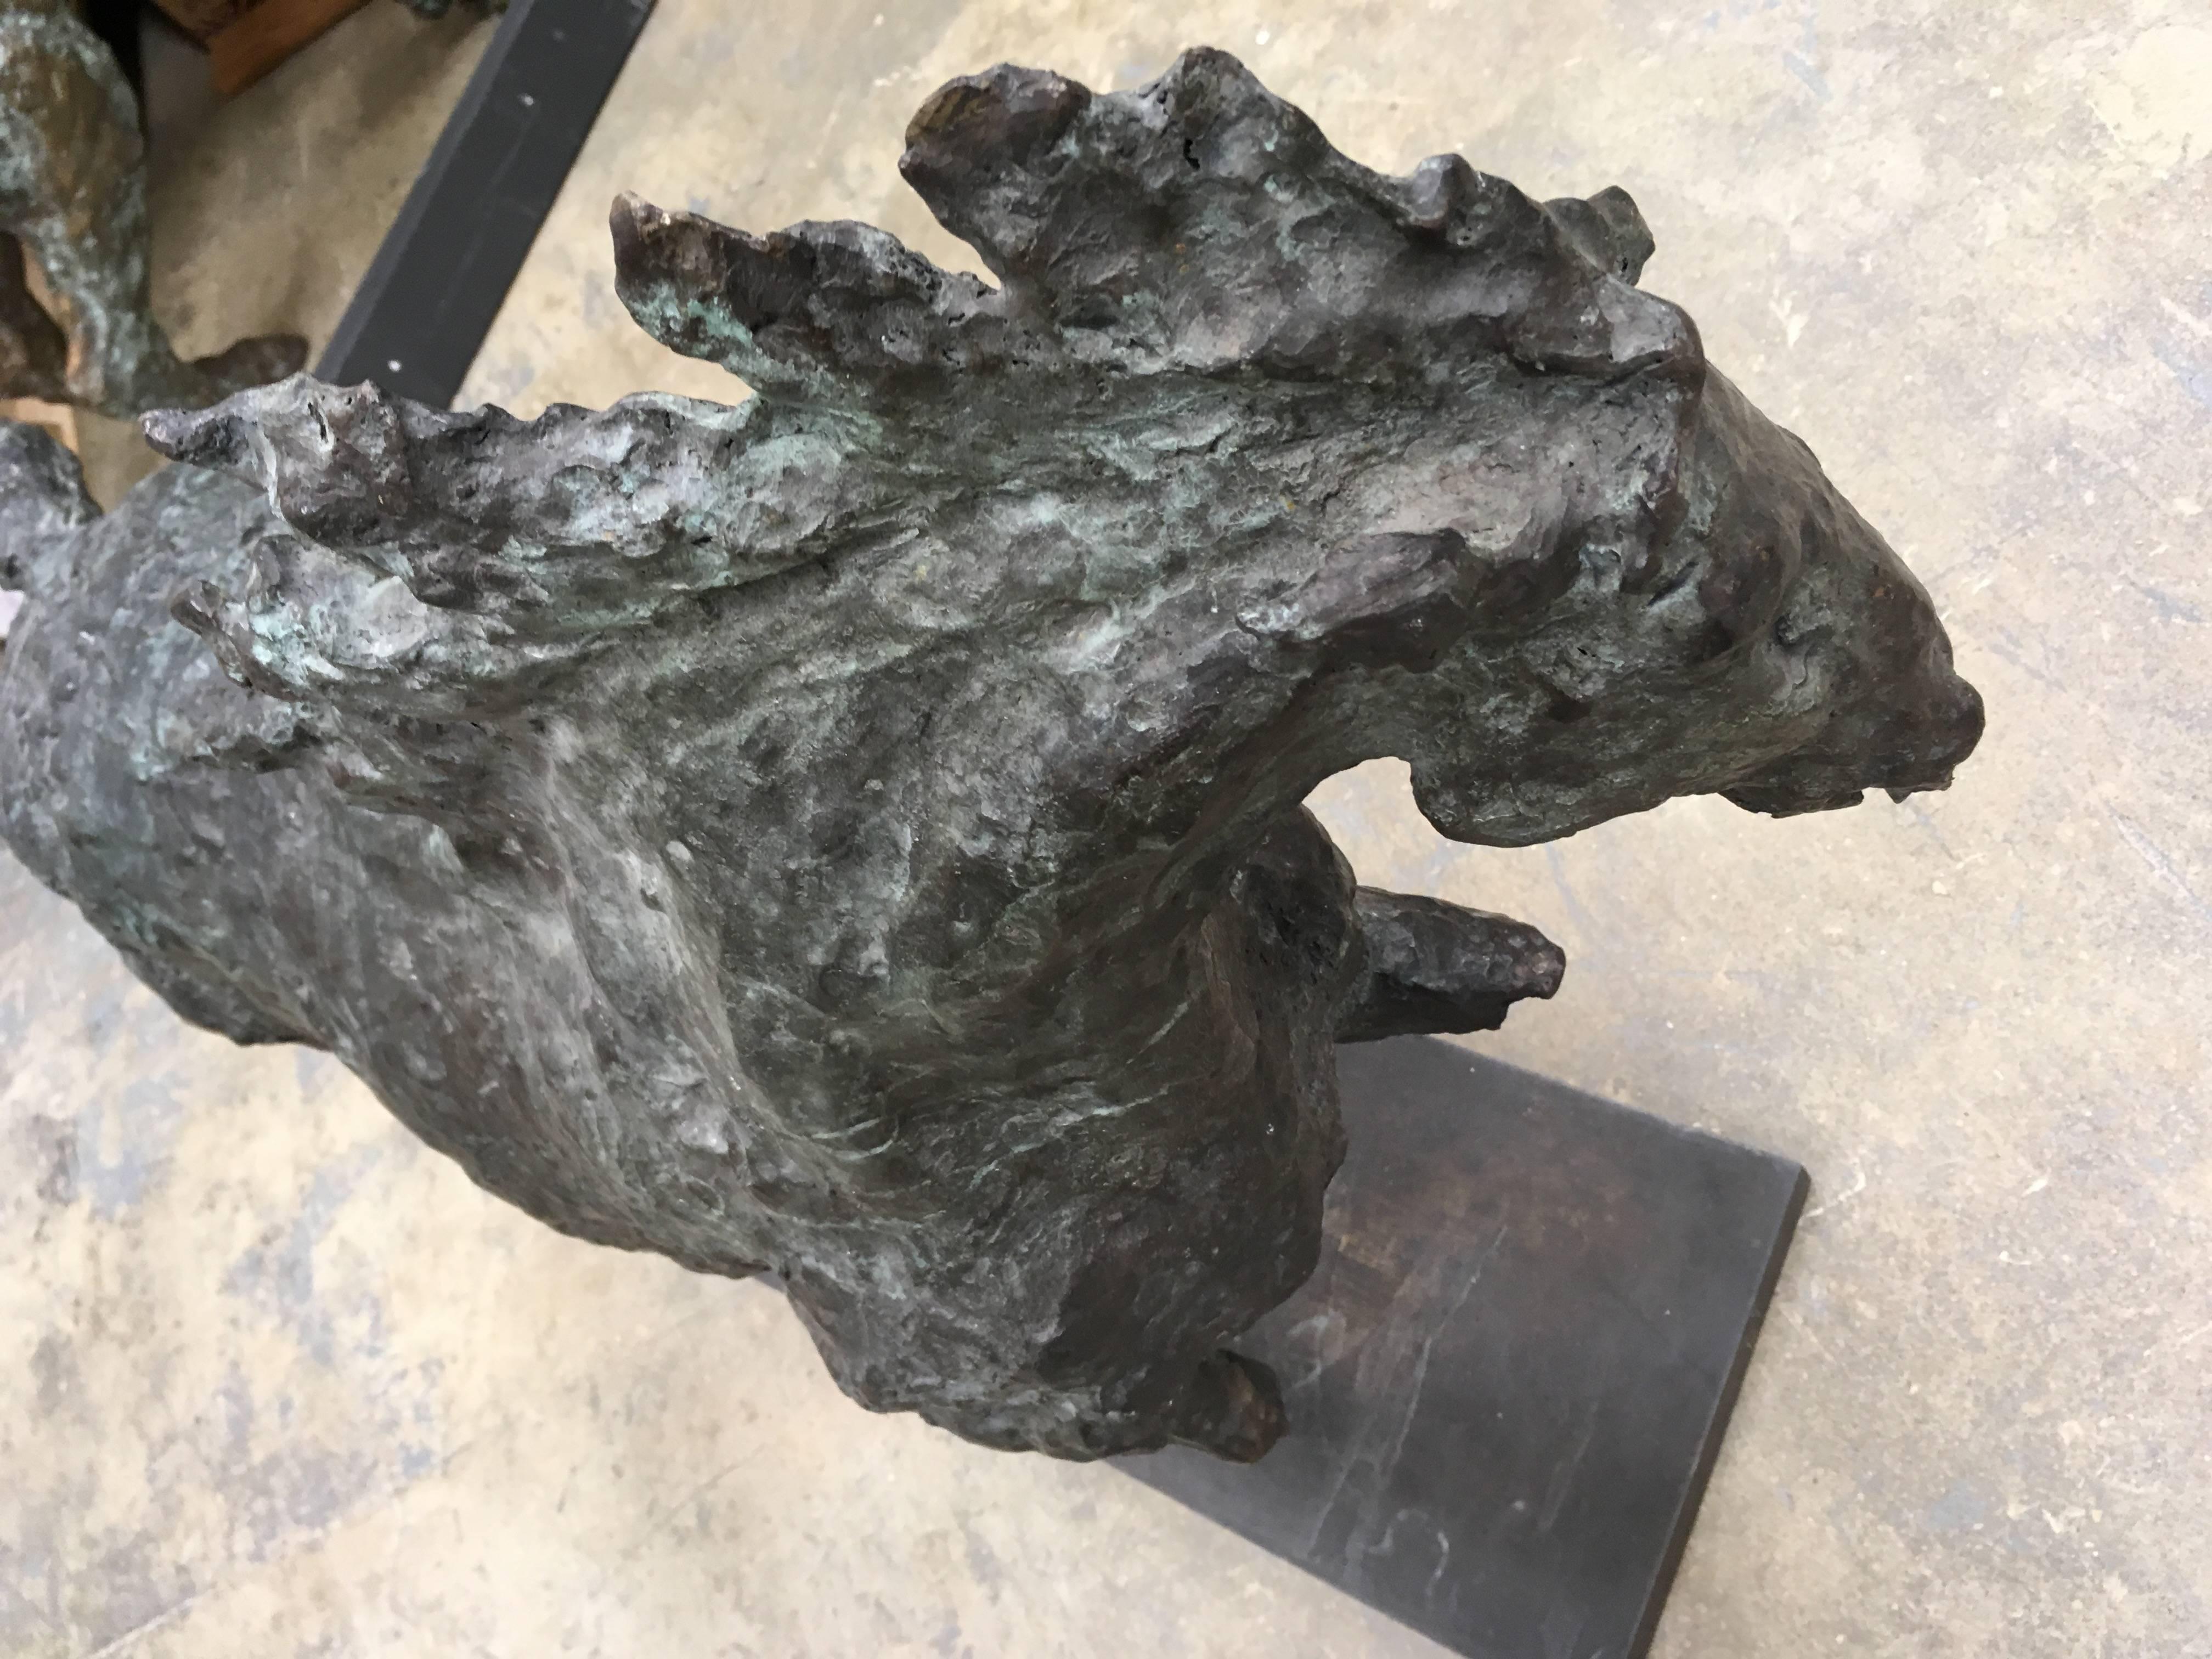 Galloping Horse - Contemporary Sculpture by Lina Binkele